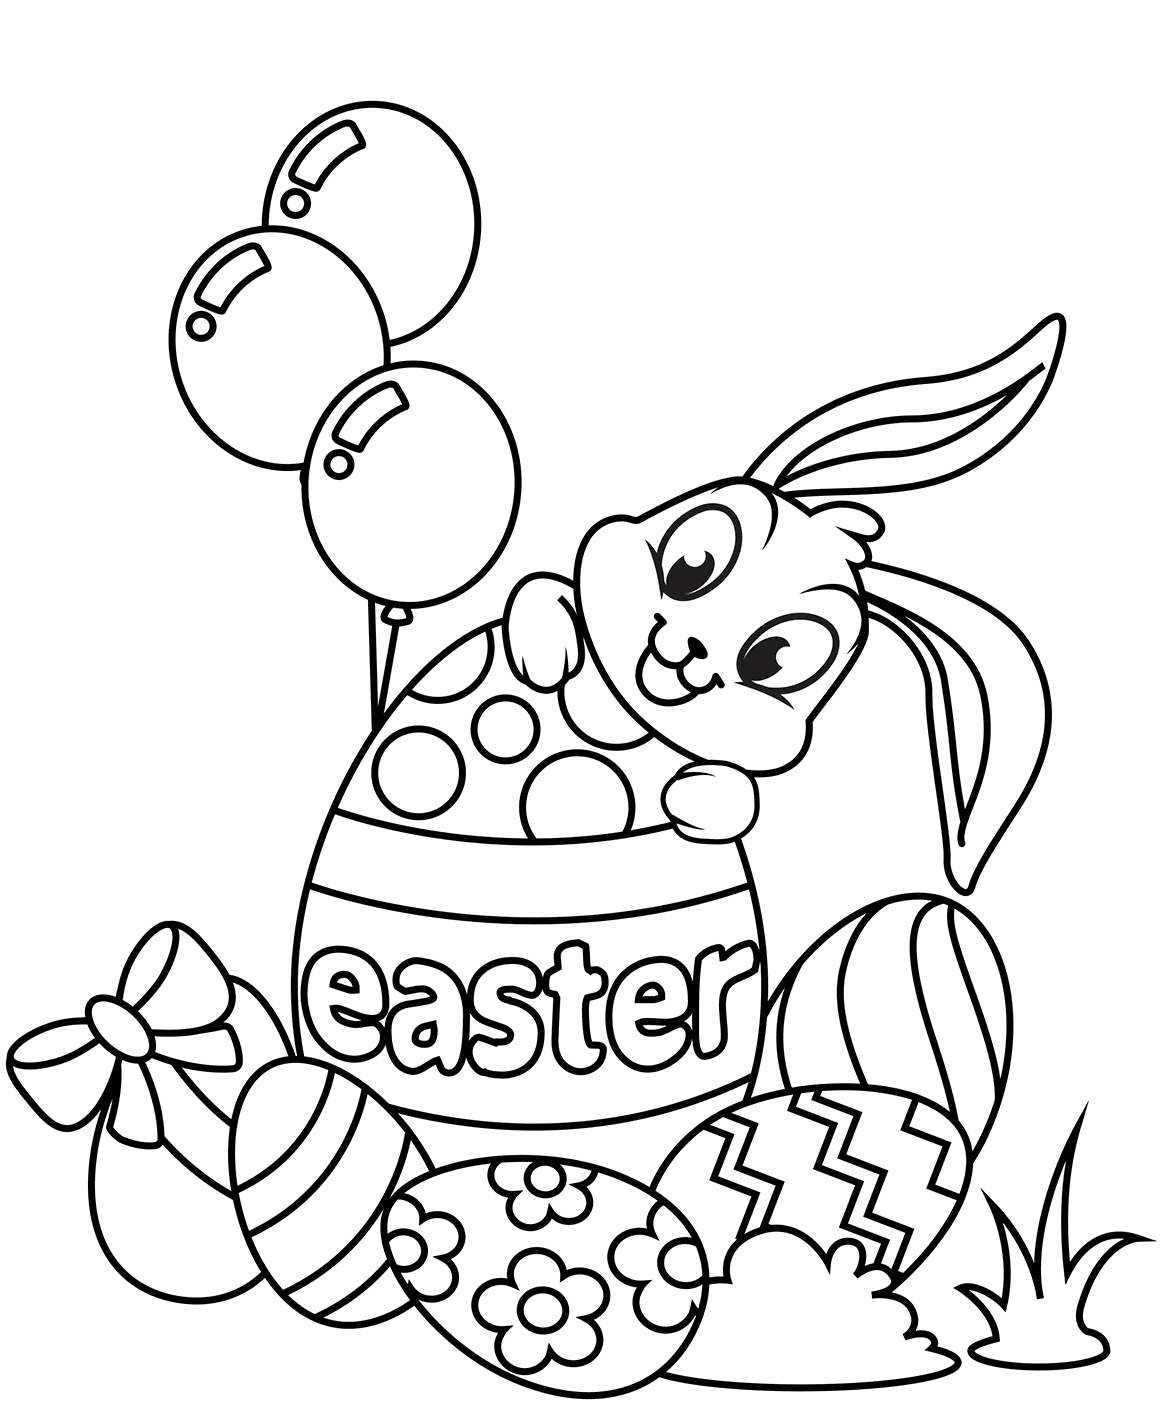 Download 30 Free Easter Bunny Coloring Pages Printable